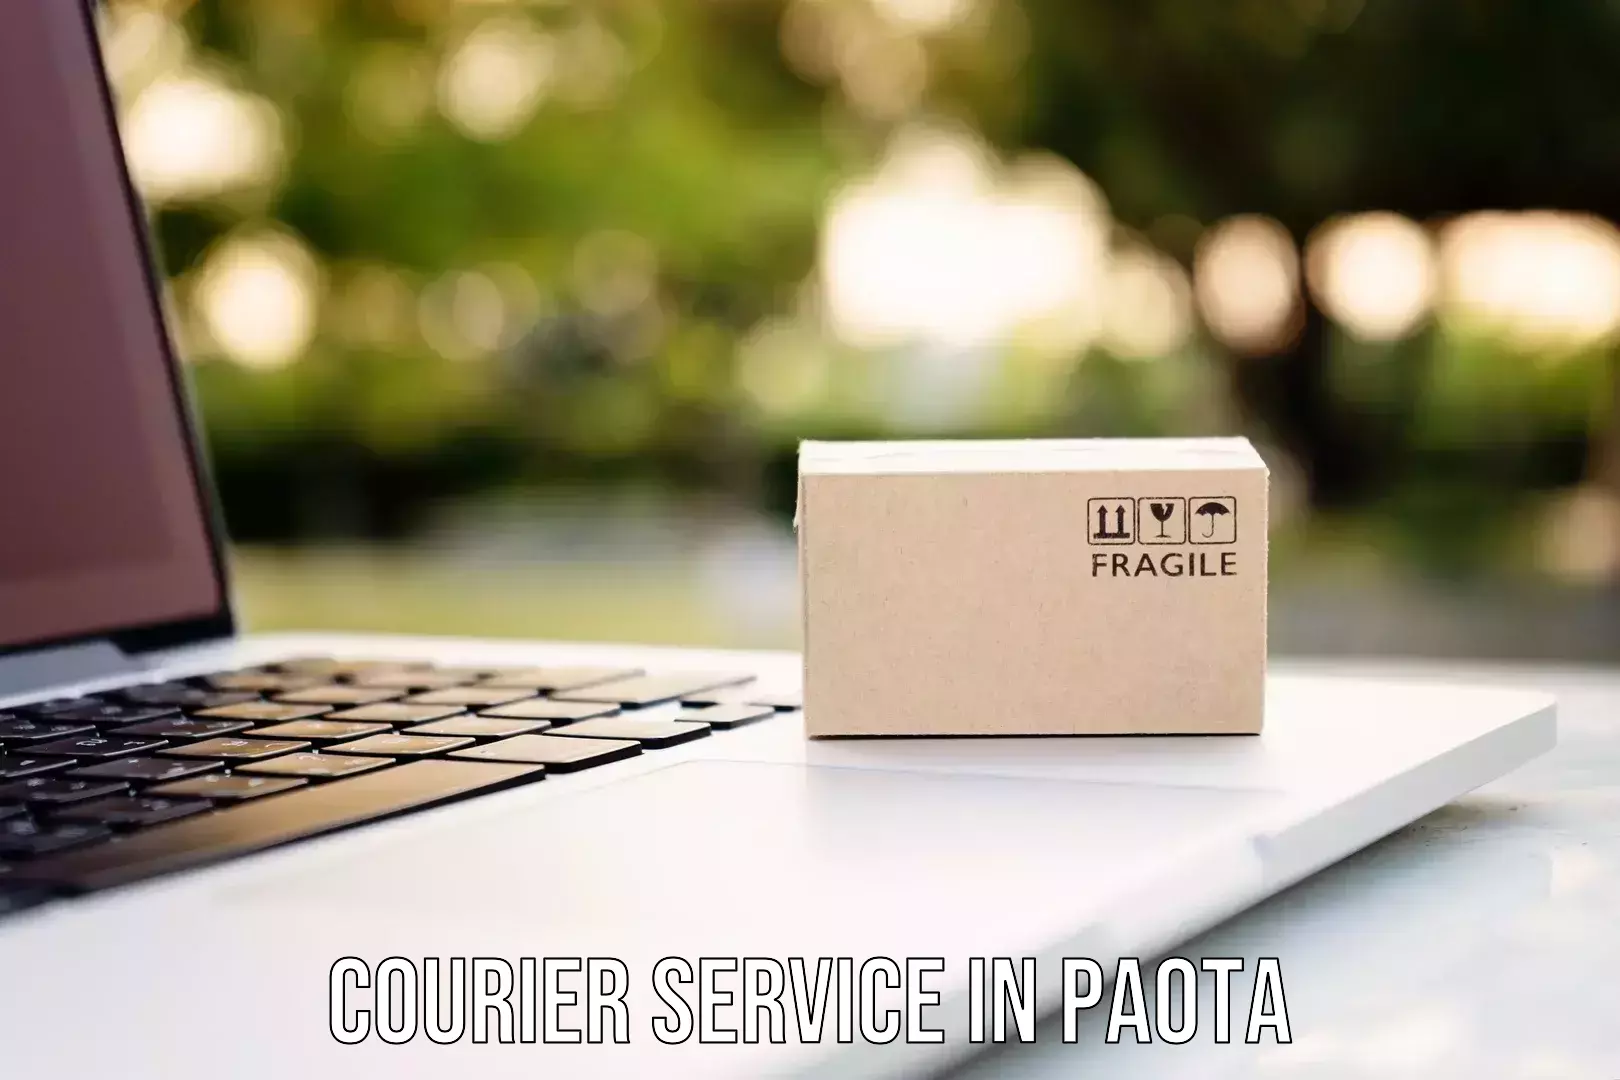 Business delivery service in Paota